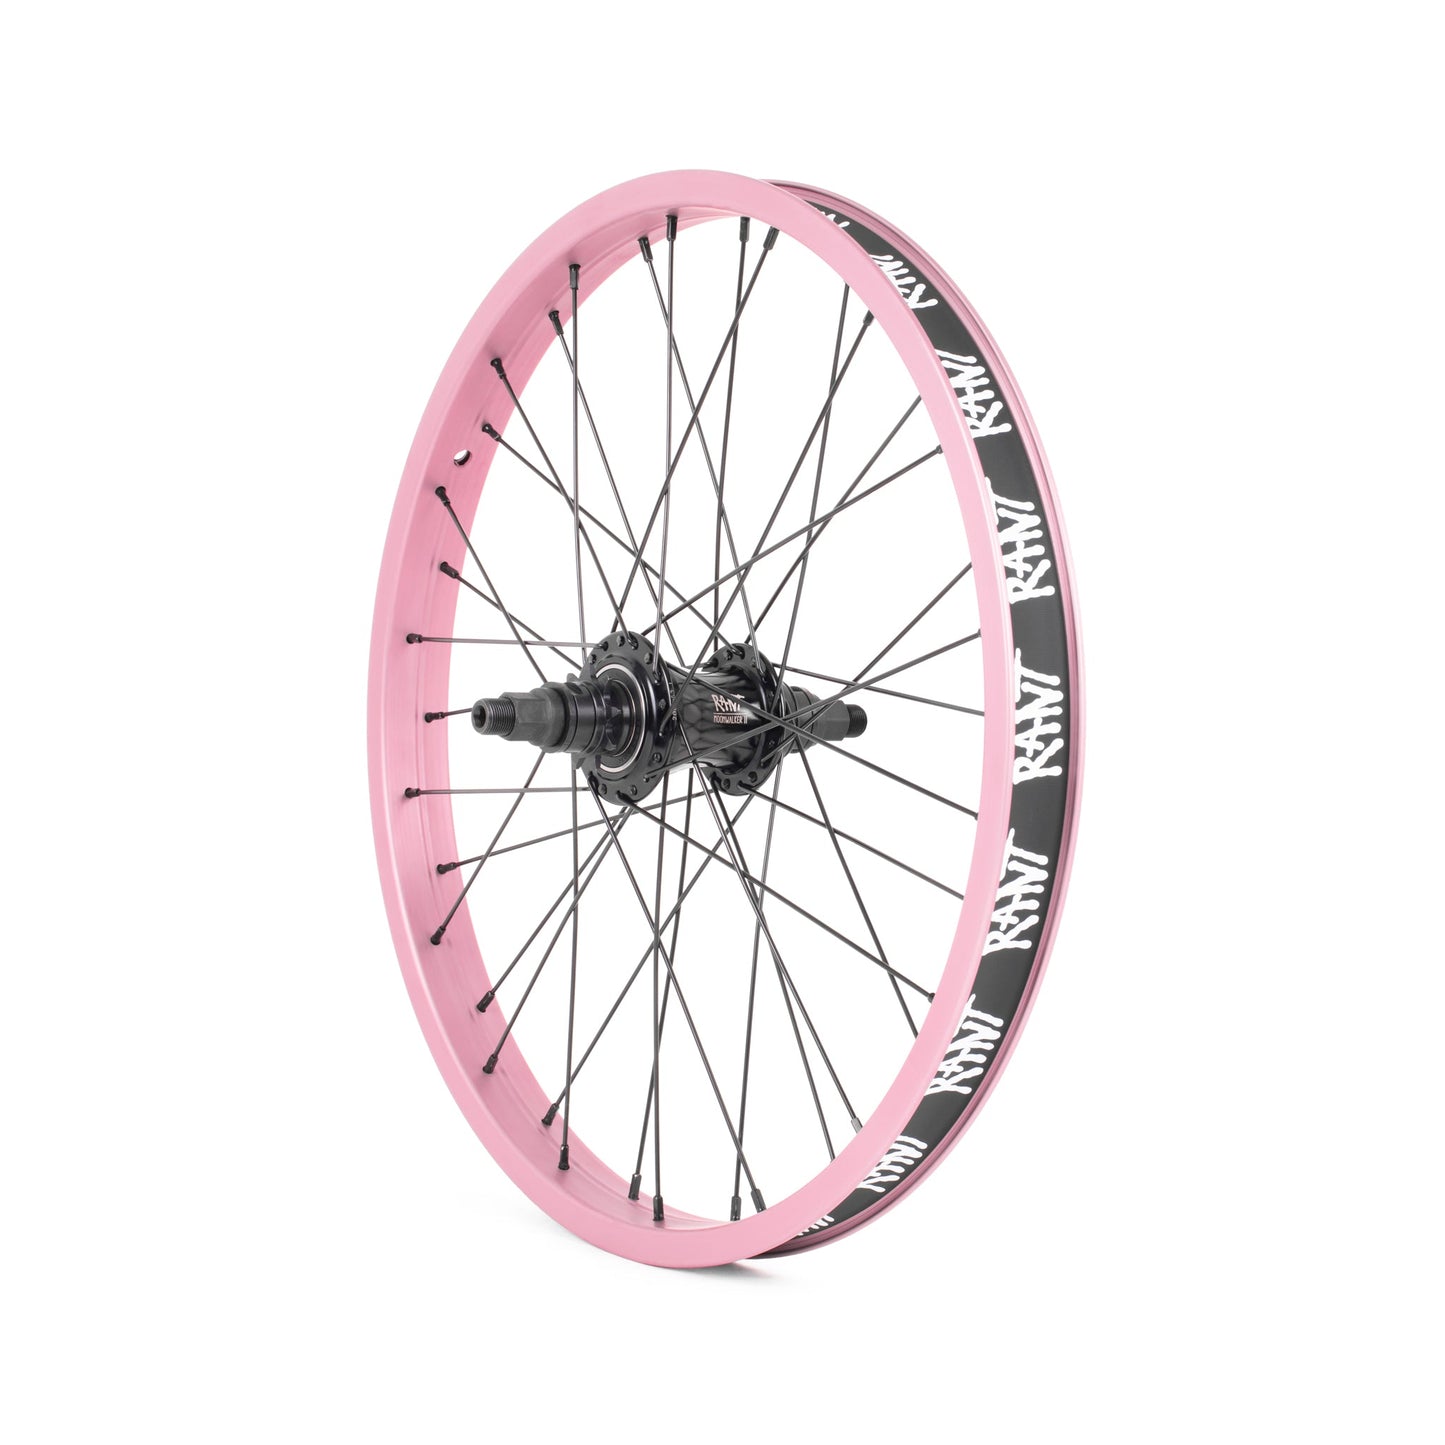 RANT Moonwalker II Rear Freecoaster Wheel (Pepto Pink) - Sparkys Brands Sparkys Brands  Complete Wheel, Freecoaster Rear Wheel, Rant Bmx, Rant Complete Wheels, Wheels and Wheel Parts bmx pro quality freestyle bicycle